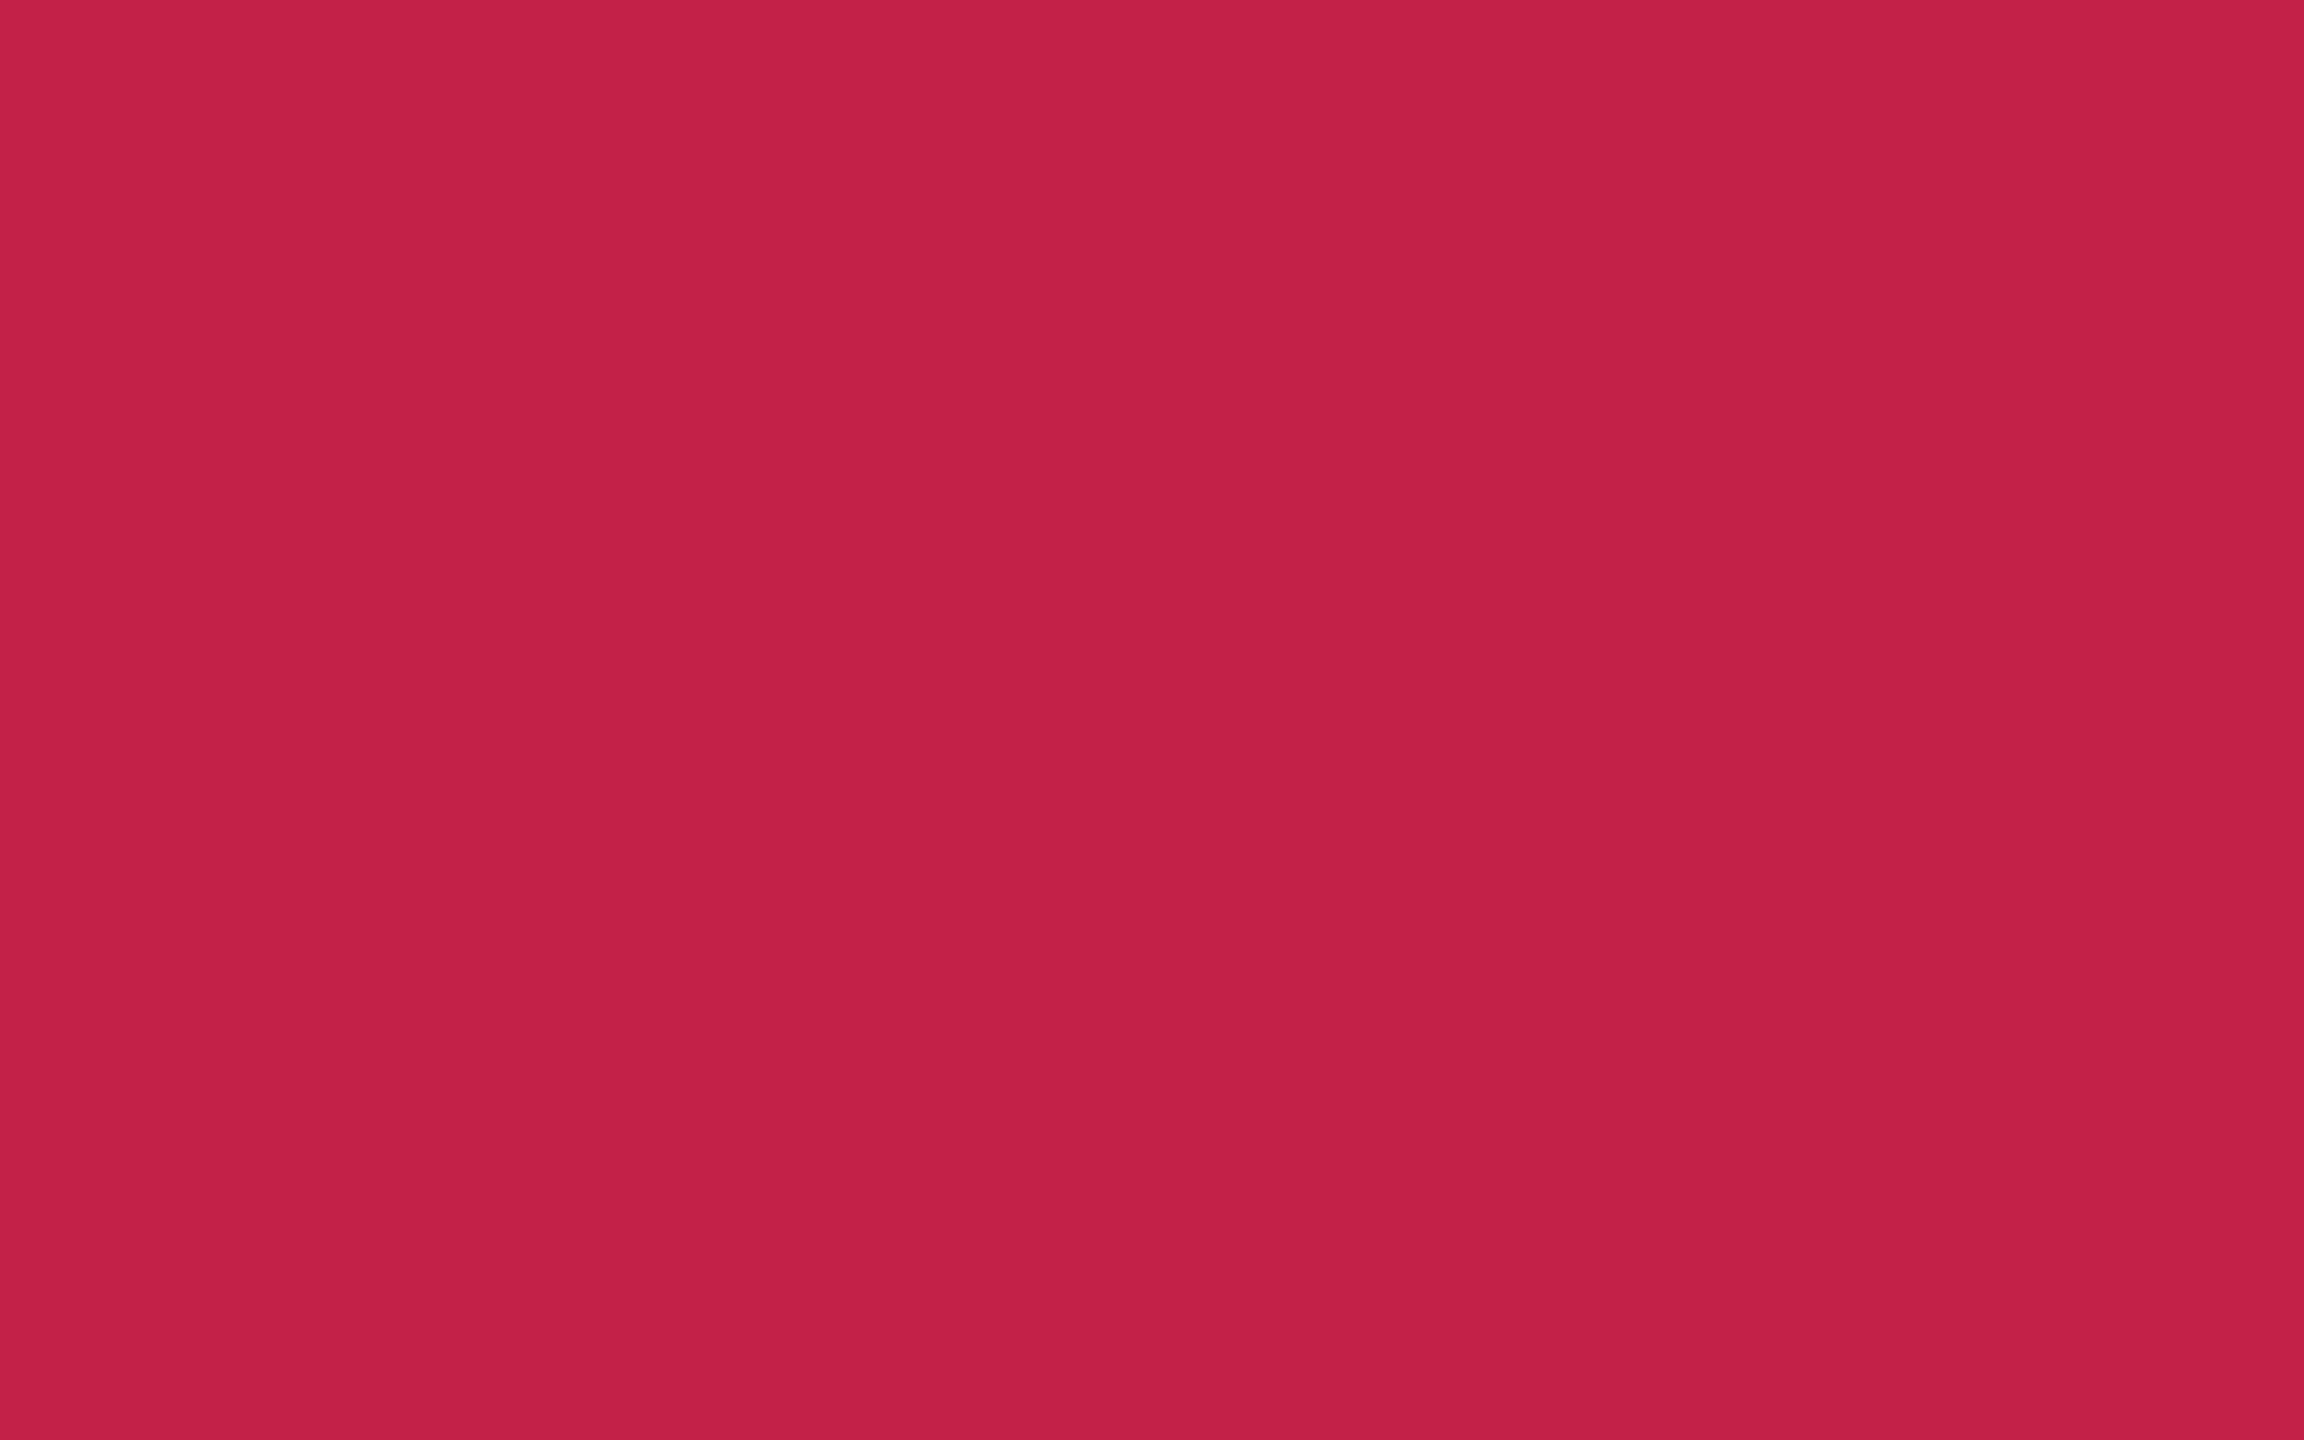 2304x1440 Bright Maroon Solid Color Background